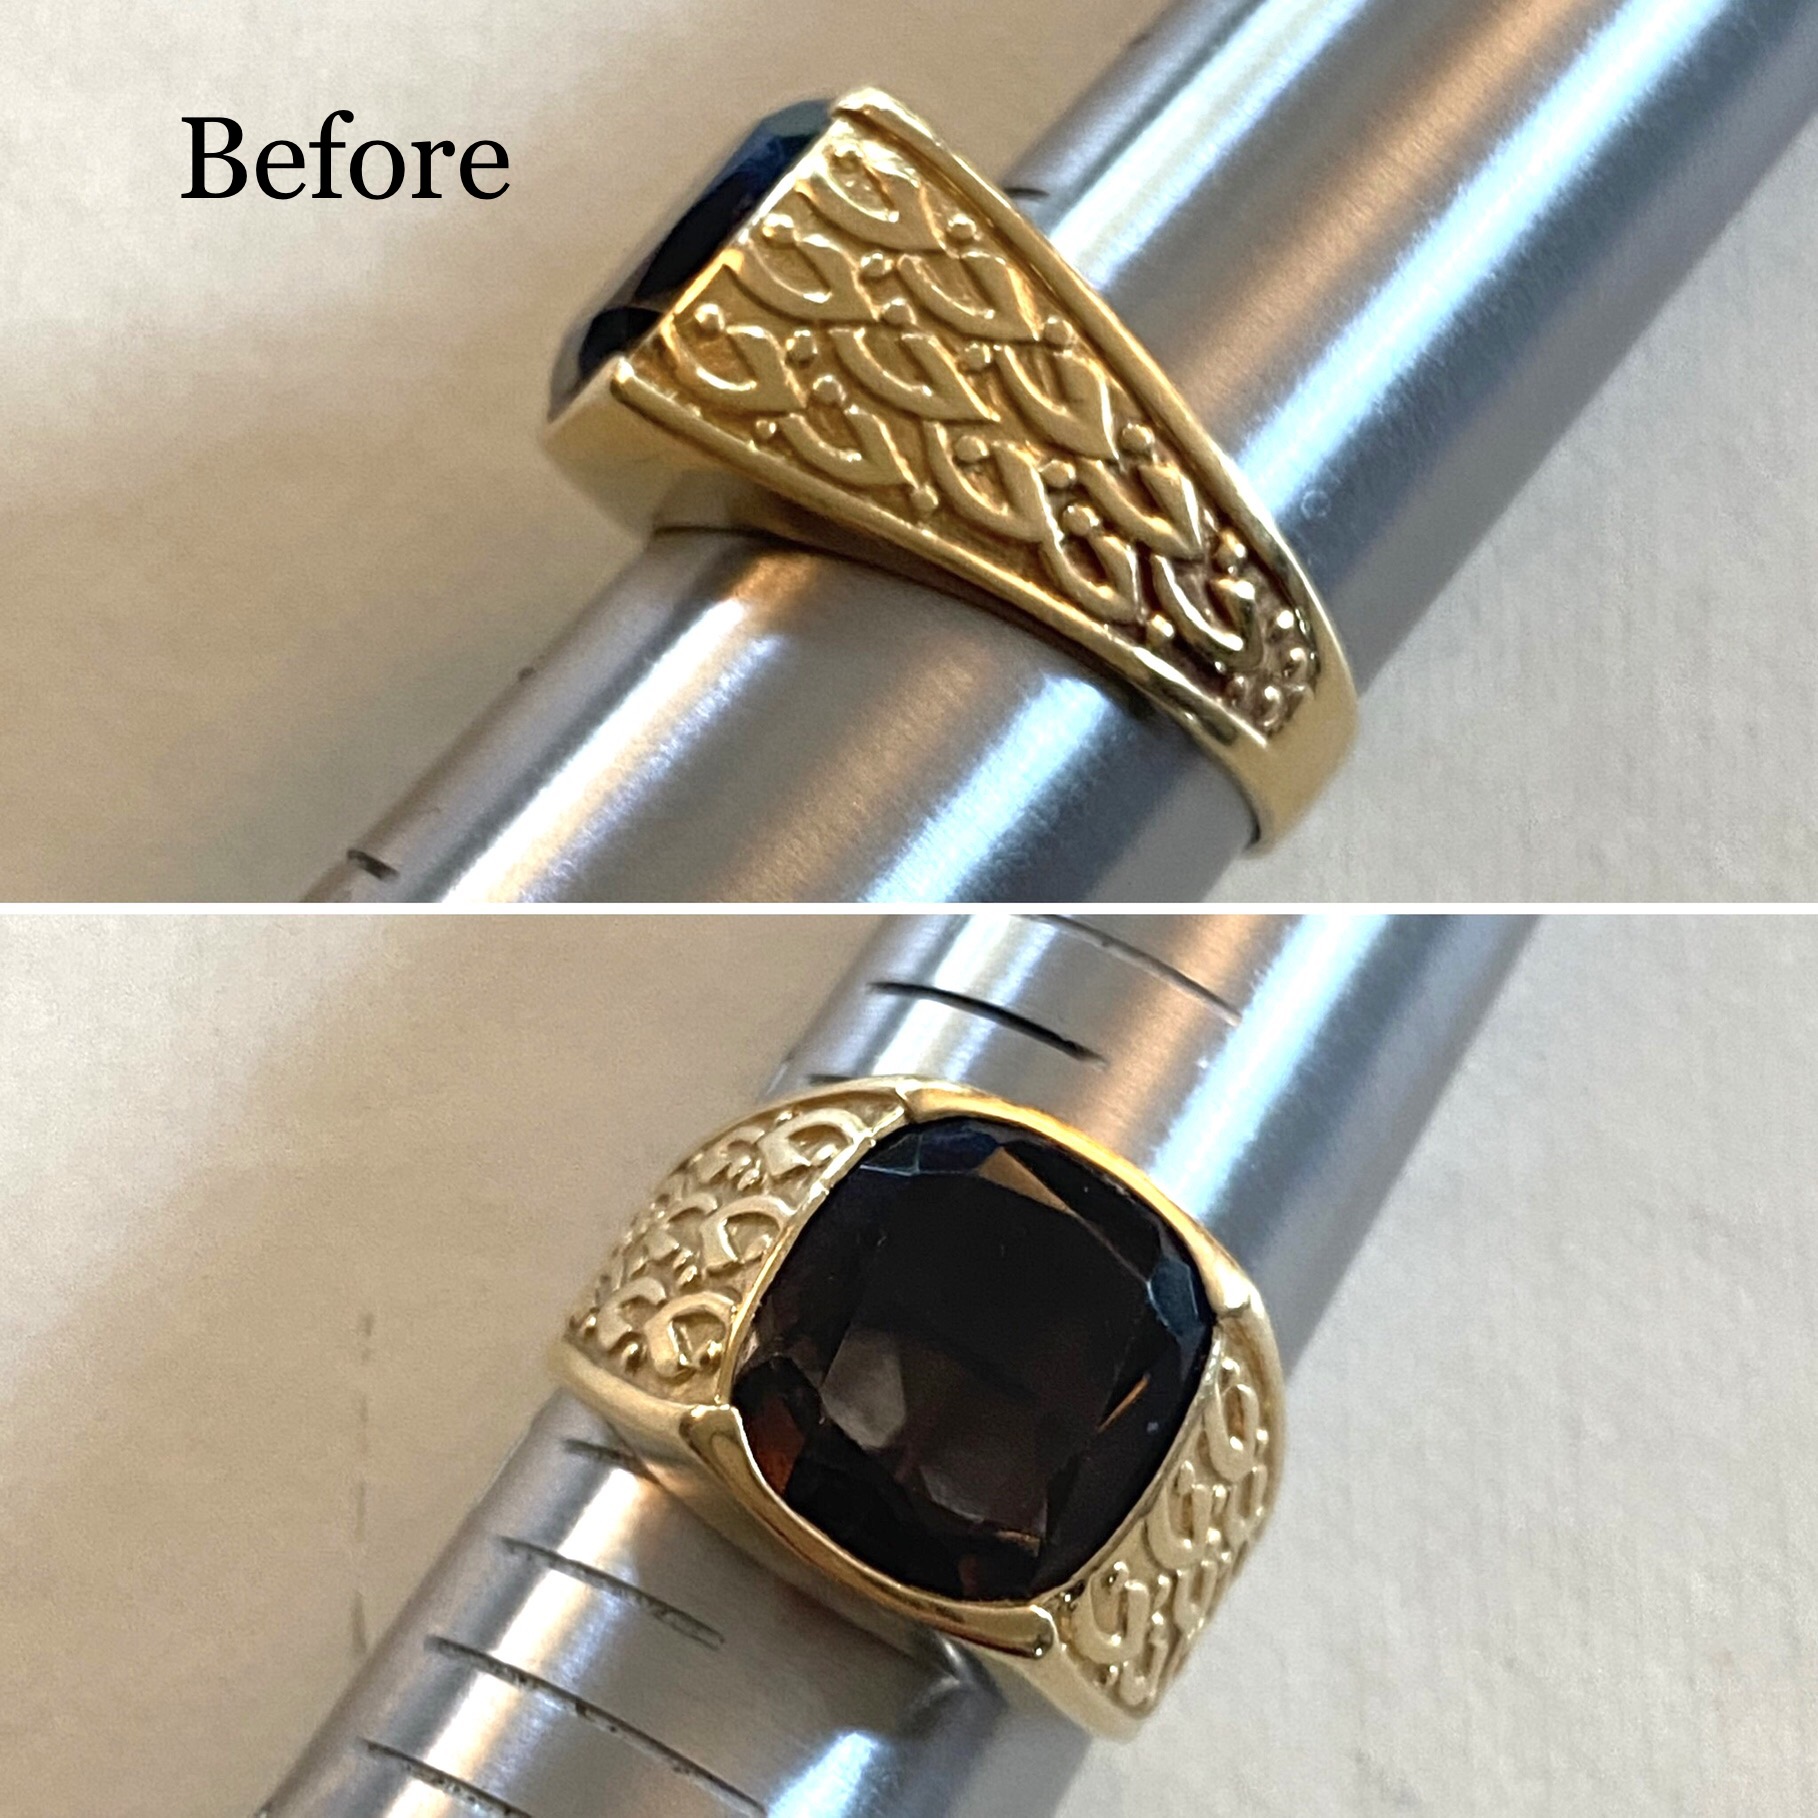 Father to Daughter Ring Makeover